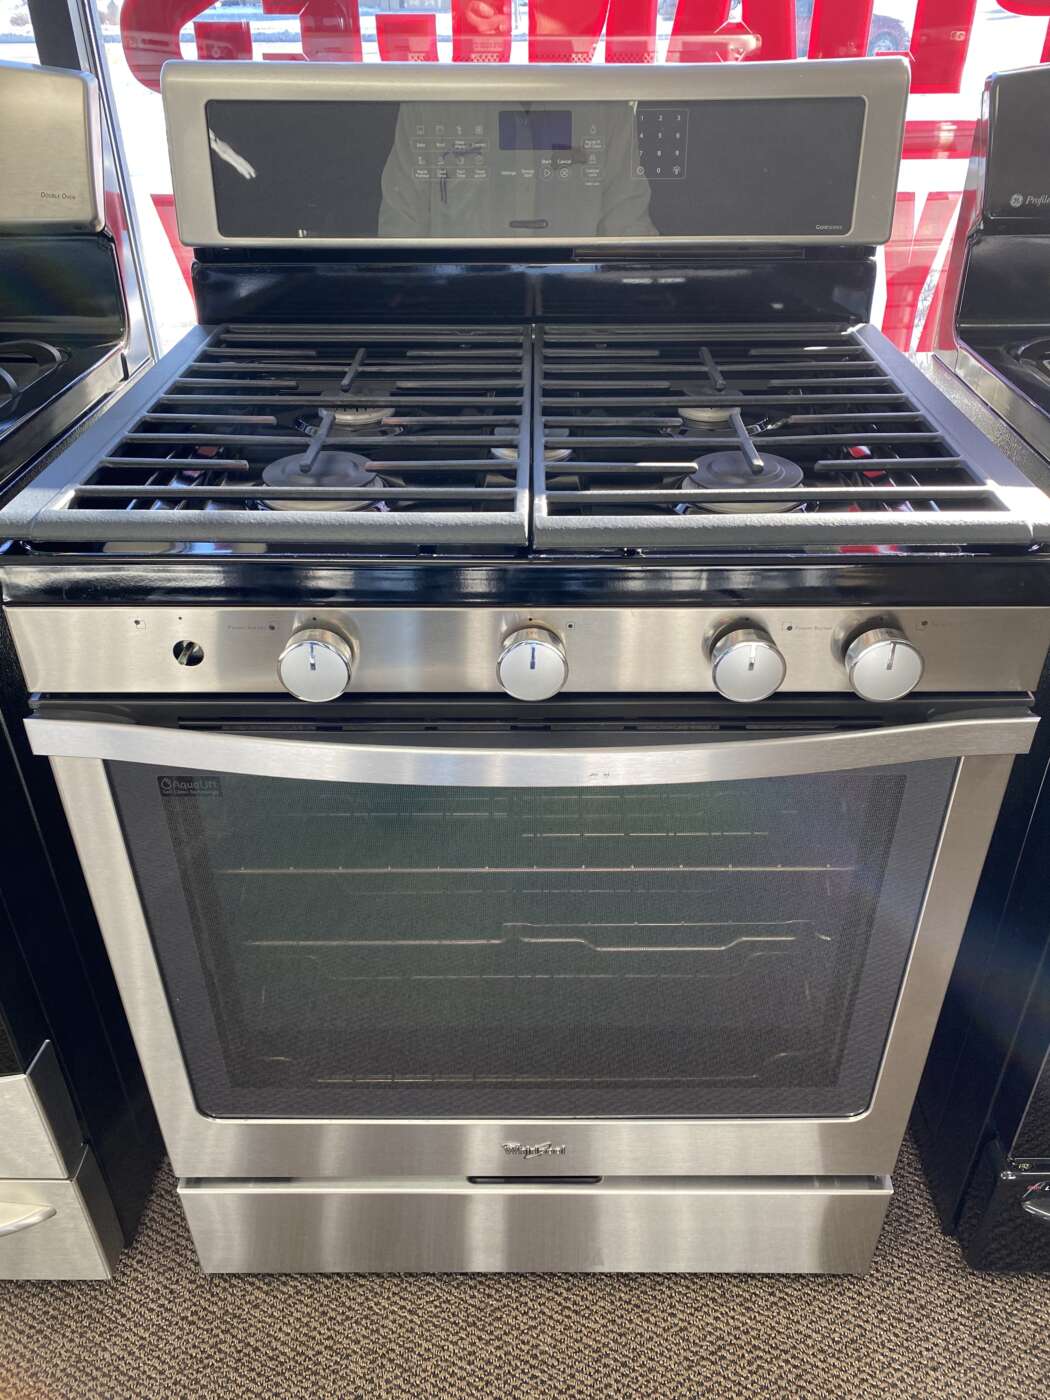 Reconditioned WHIRLPOOL Self-Clean Convection-Oven GAS Range – Stainless